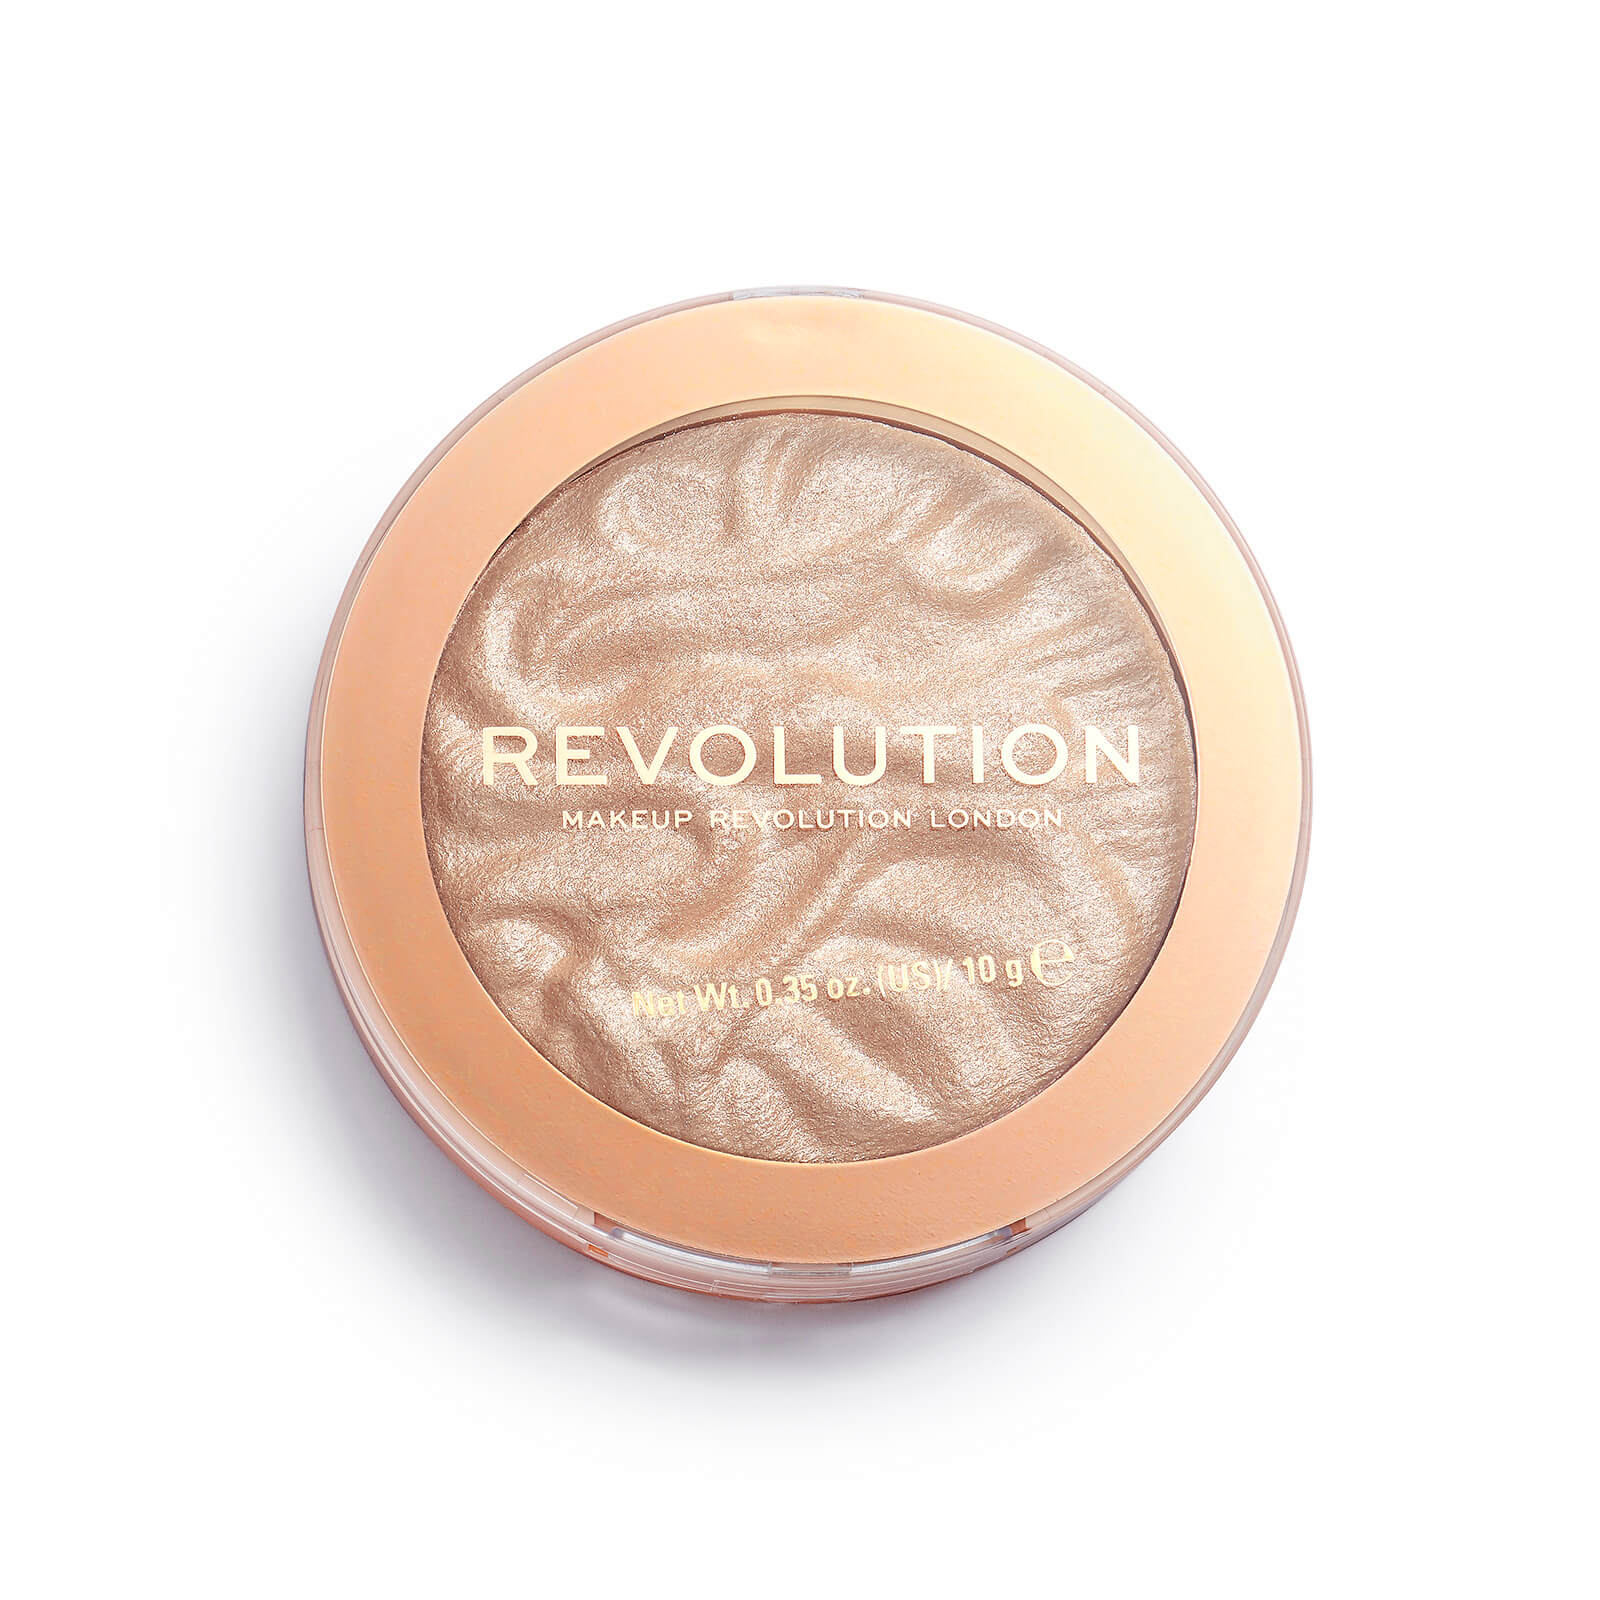 Makeup Revolution Highlight Reloaded (Various Shades) - Just My Type